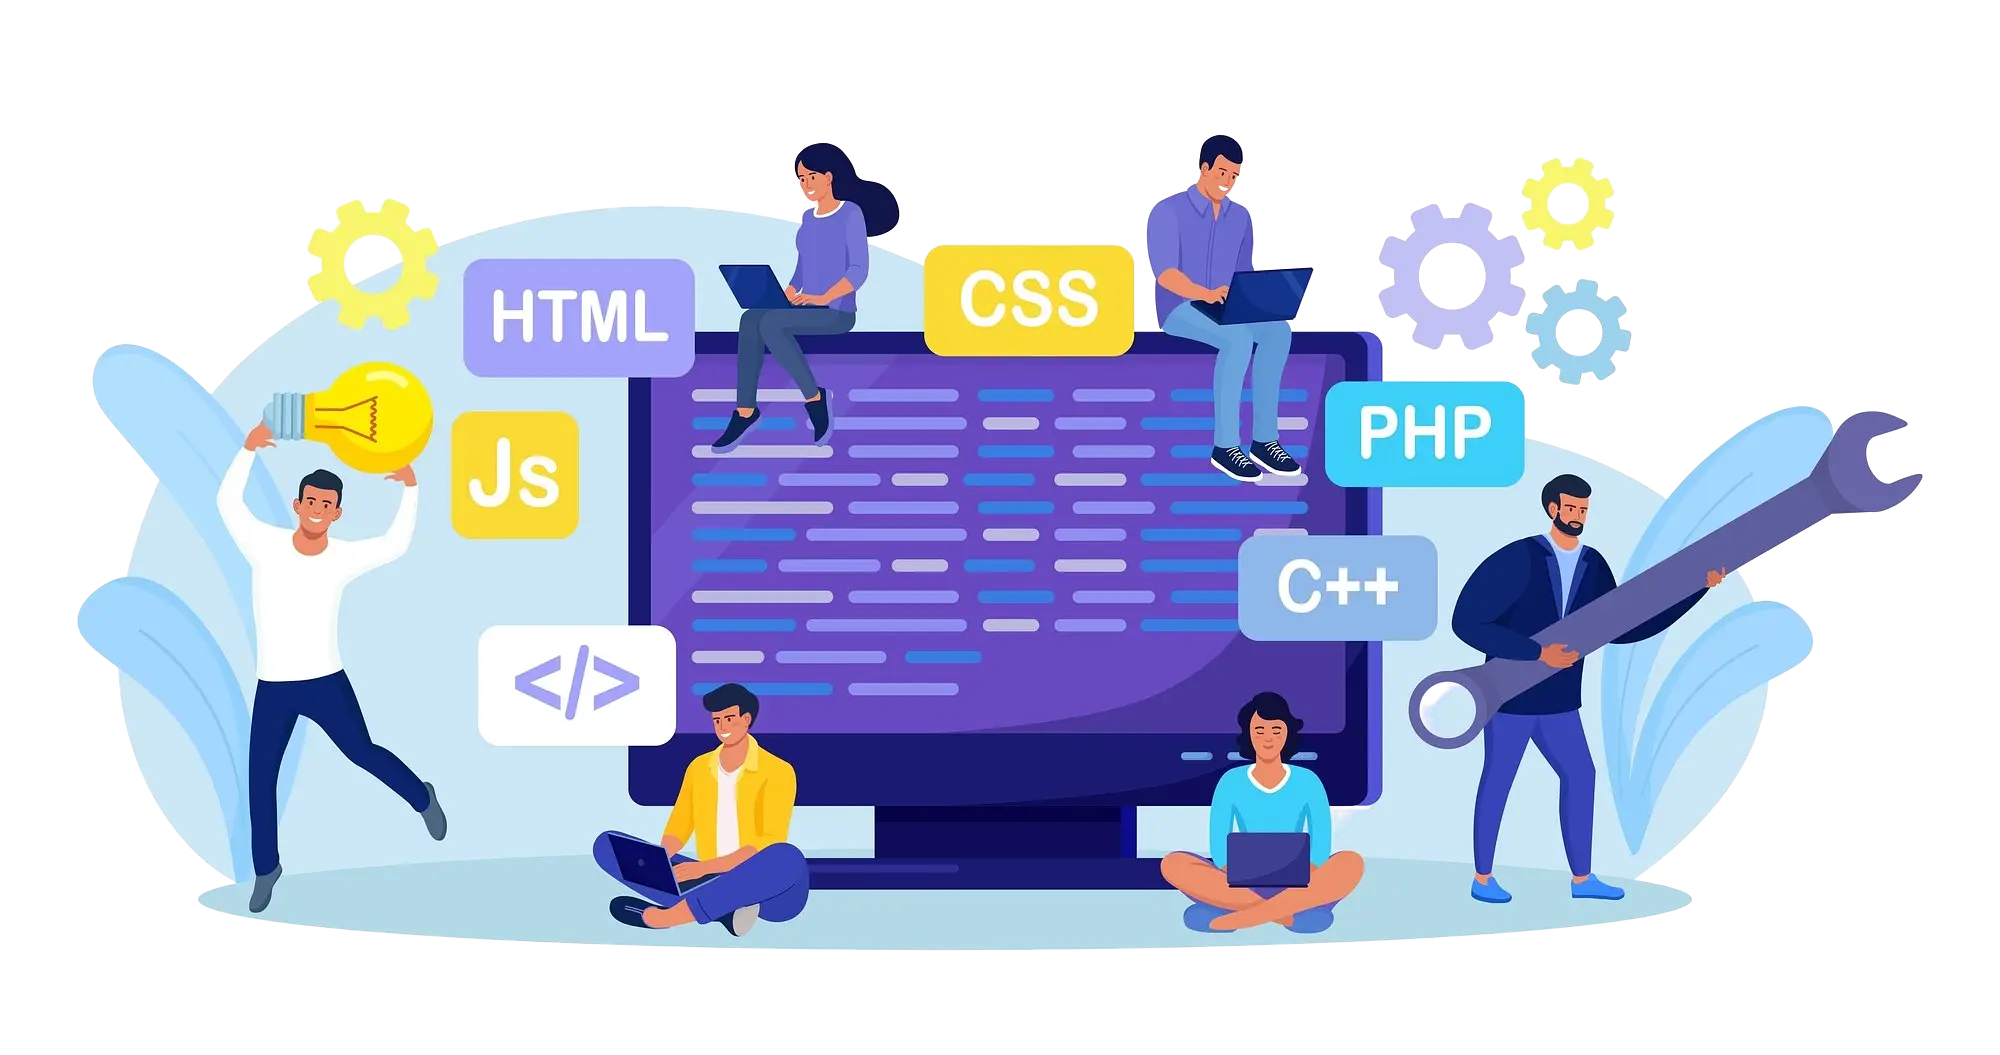 How to become a web developer - The ultimate guide